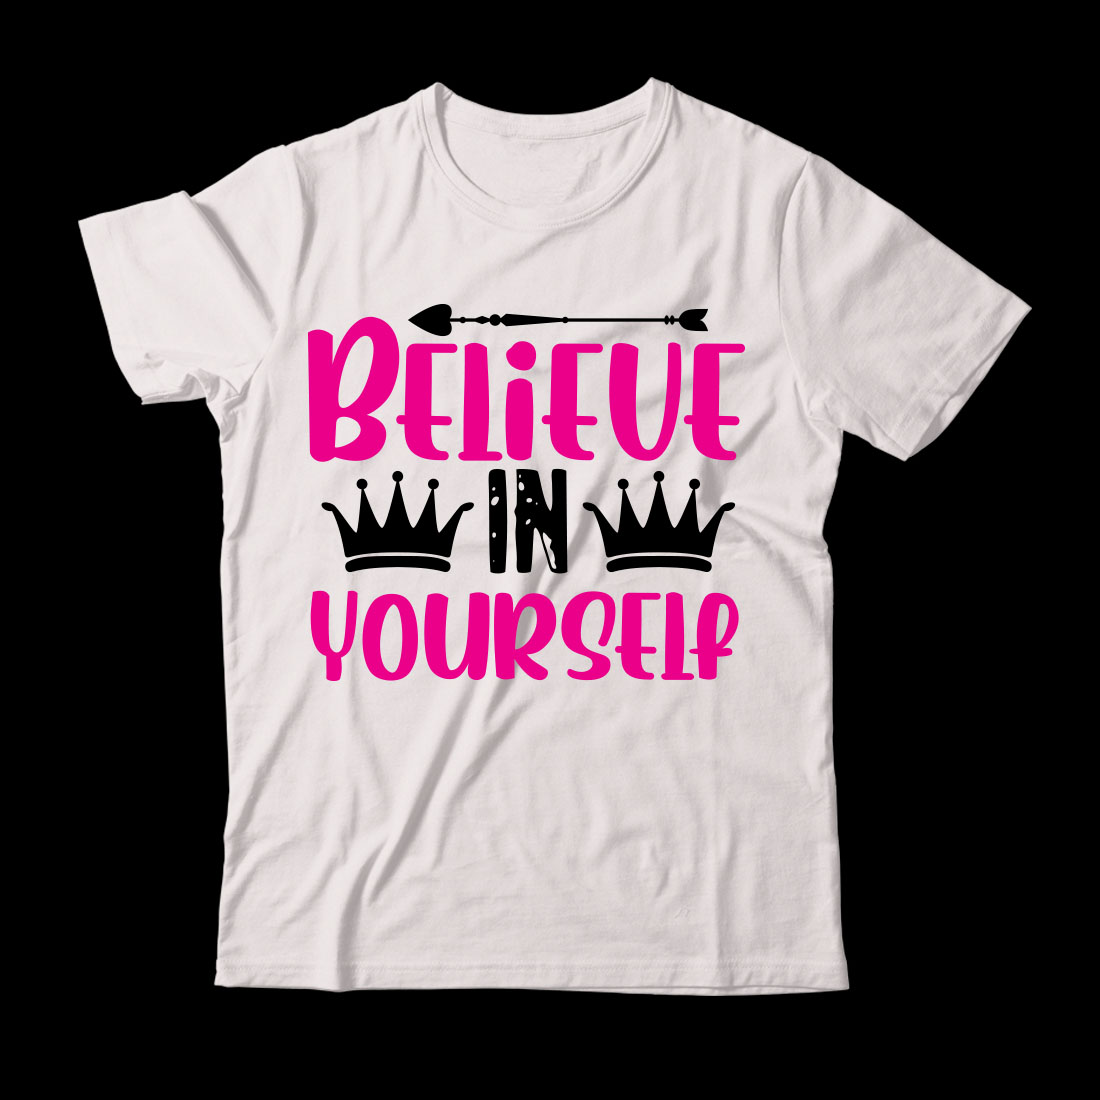 White t - shirt with pink lettering that says believe in yourself.